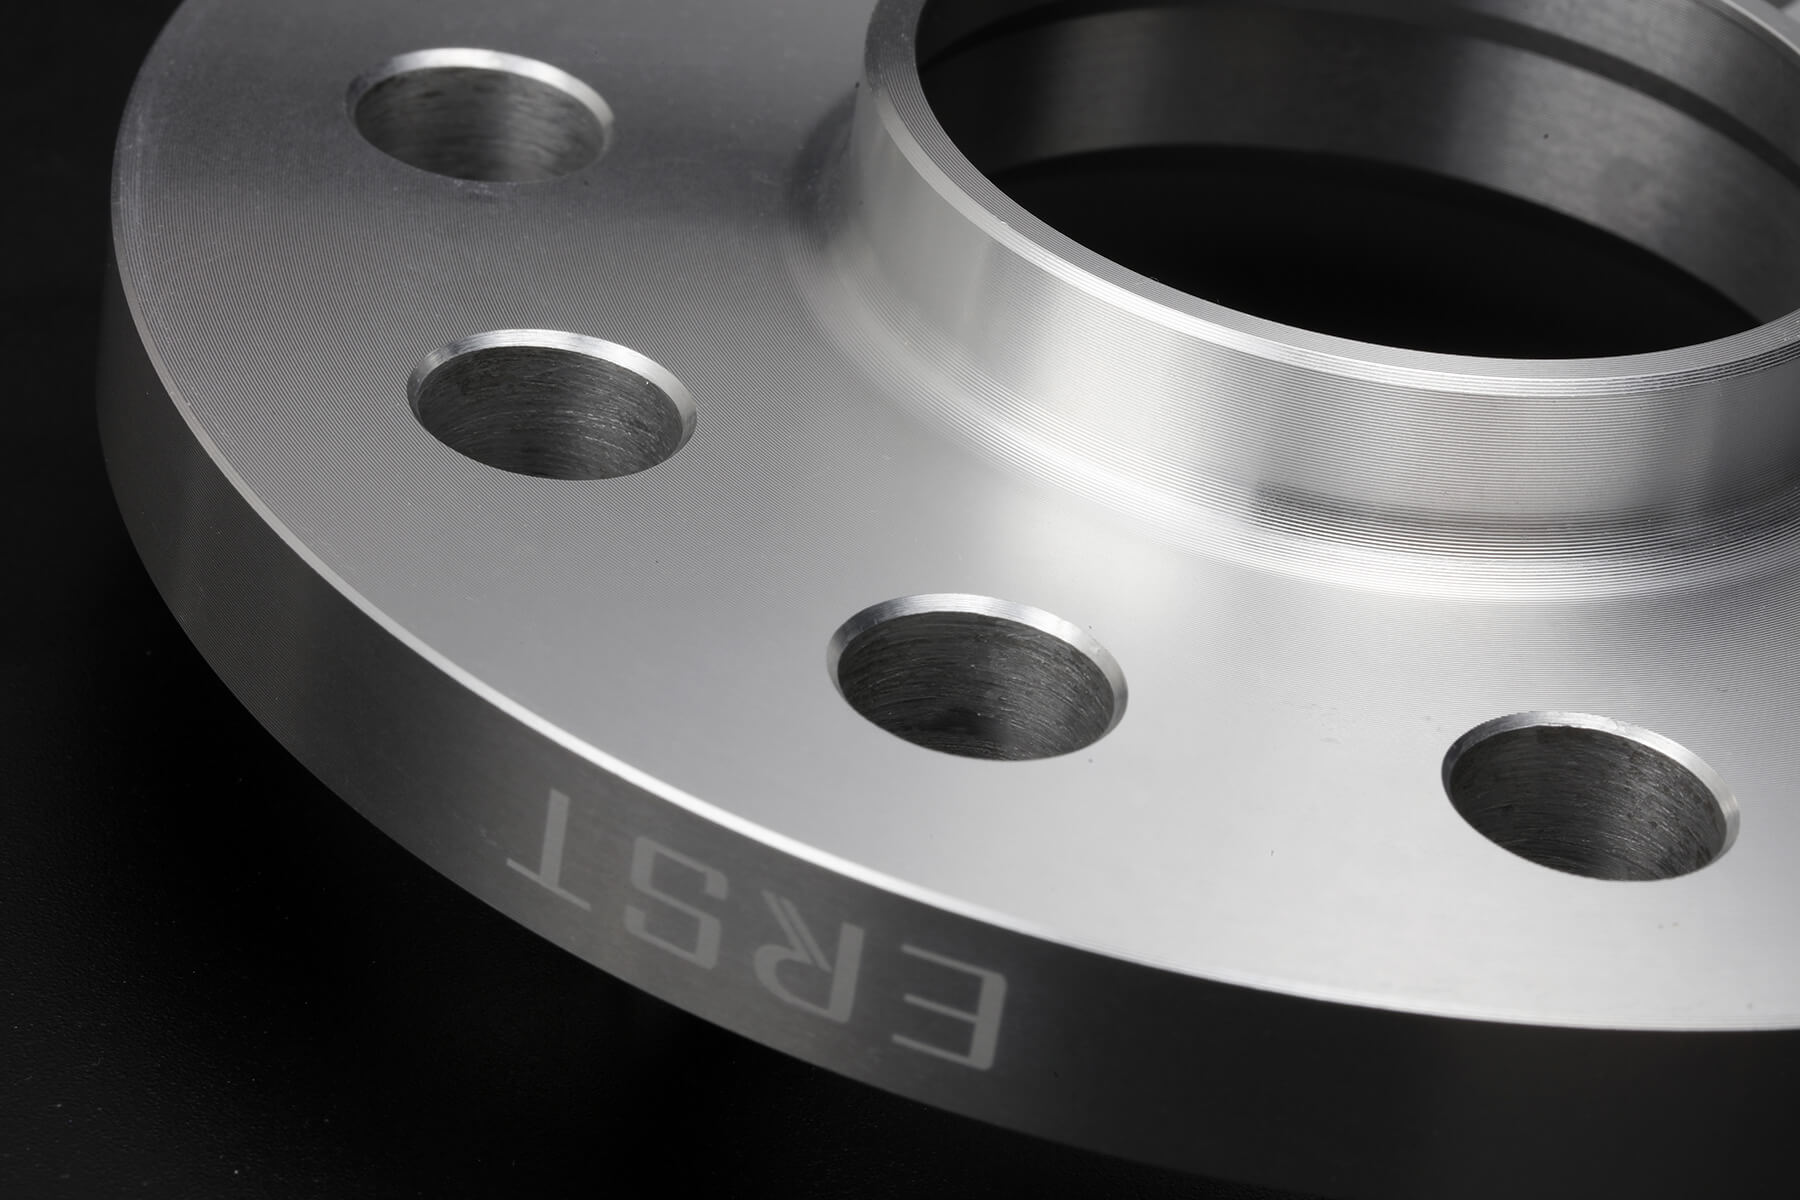 By reducing the taper of the center hub part, we increased matching rates for most of wheels.